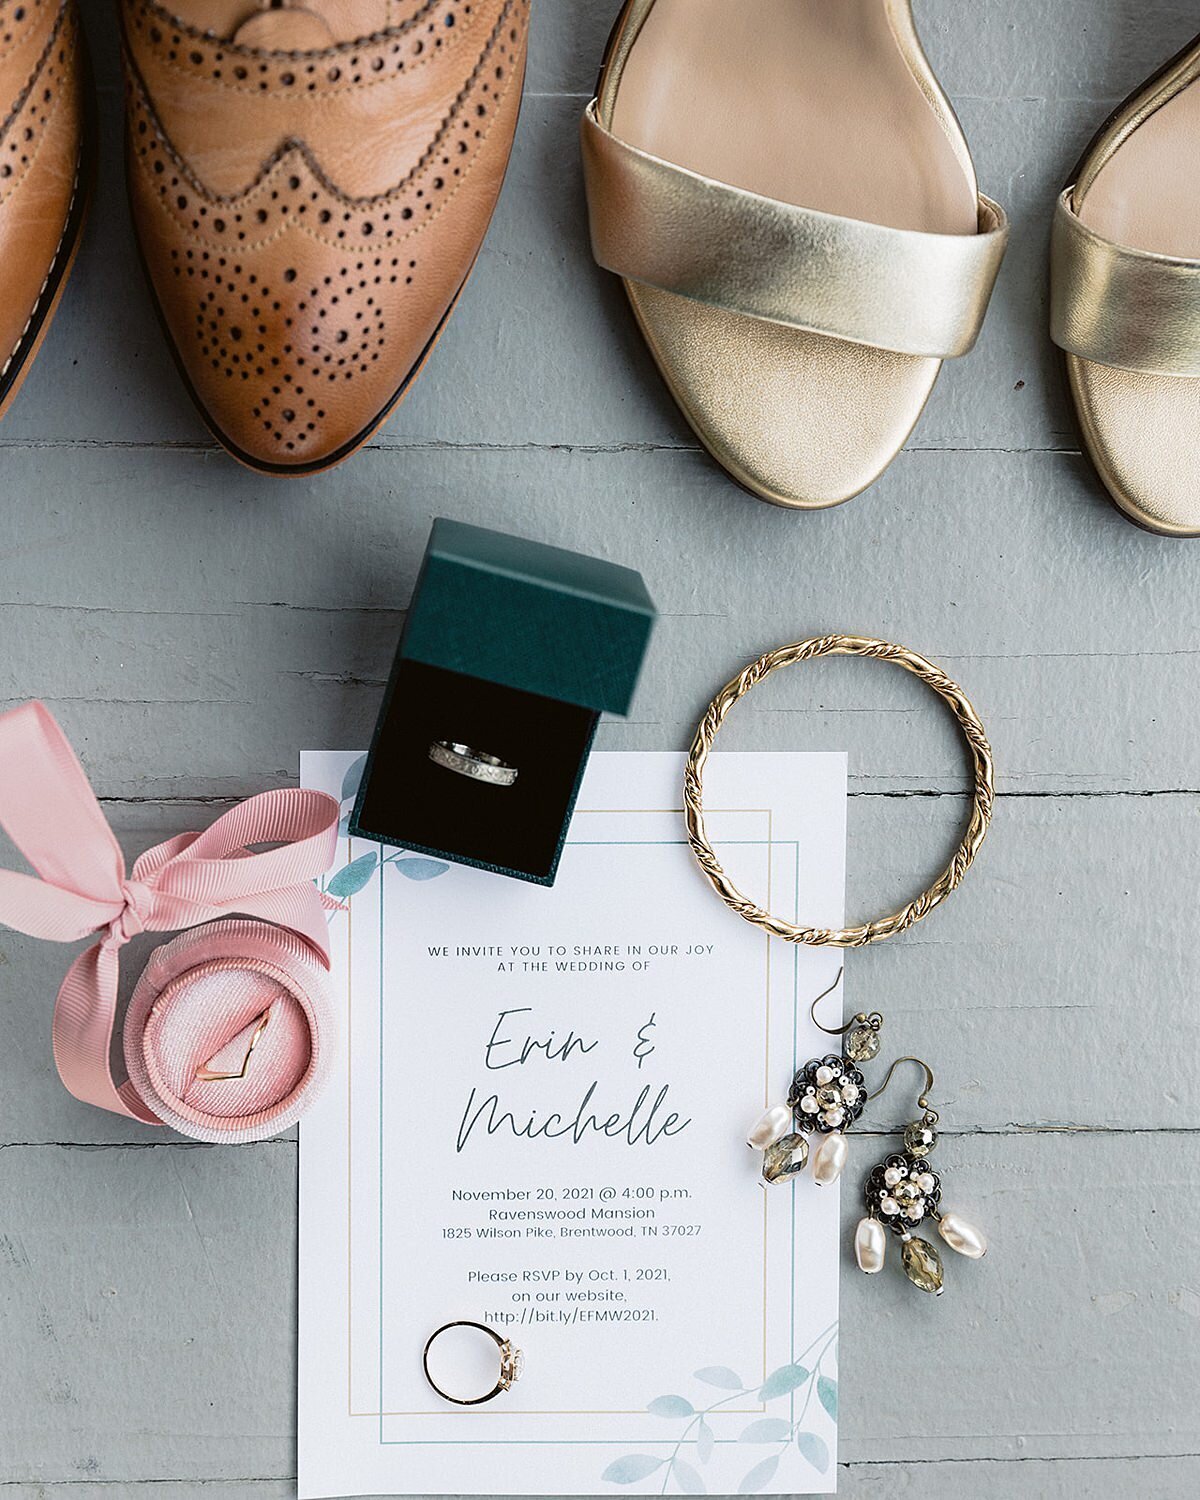 Detail image of wedding invitation for LGBTQIA wedding in Nashville. One pair of brown wingtip shoes sits next to a pair of gold satin sandals with a pink ring box holding a v shaped gold wedding band next to a dark green ring box holding a platinum wedding band. The wedding invitation with leaf details has an engagement ring and pair of pearl earrings for their wedding at Ravenswood Mansion in Nashville, TN